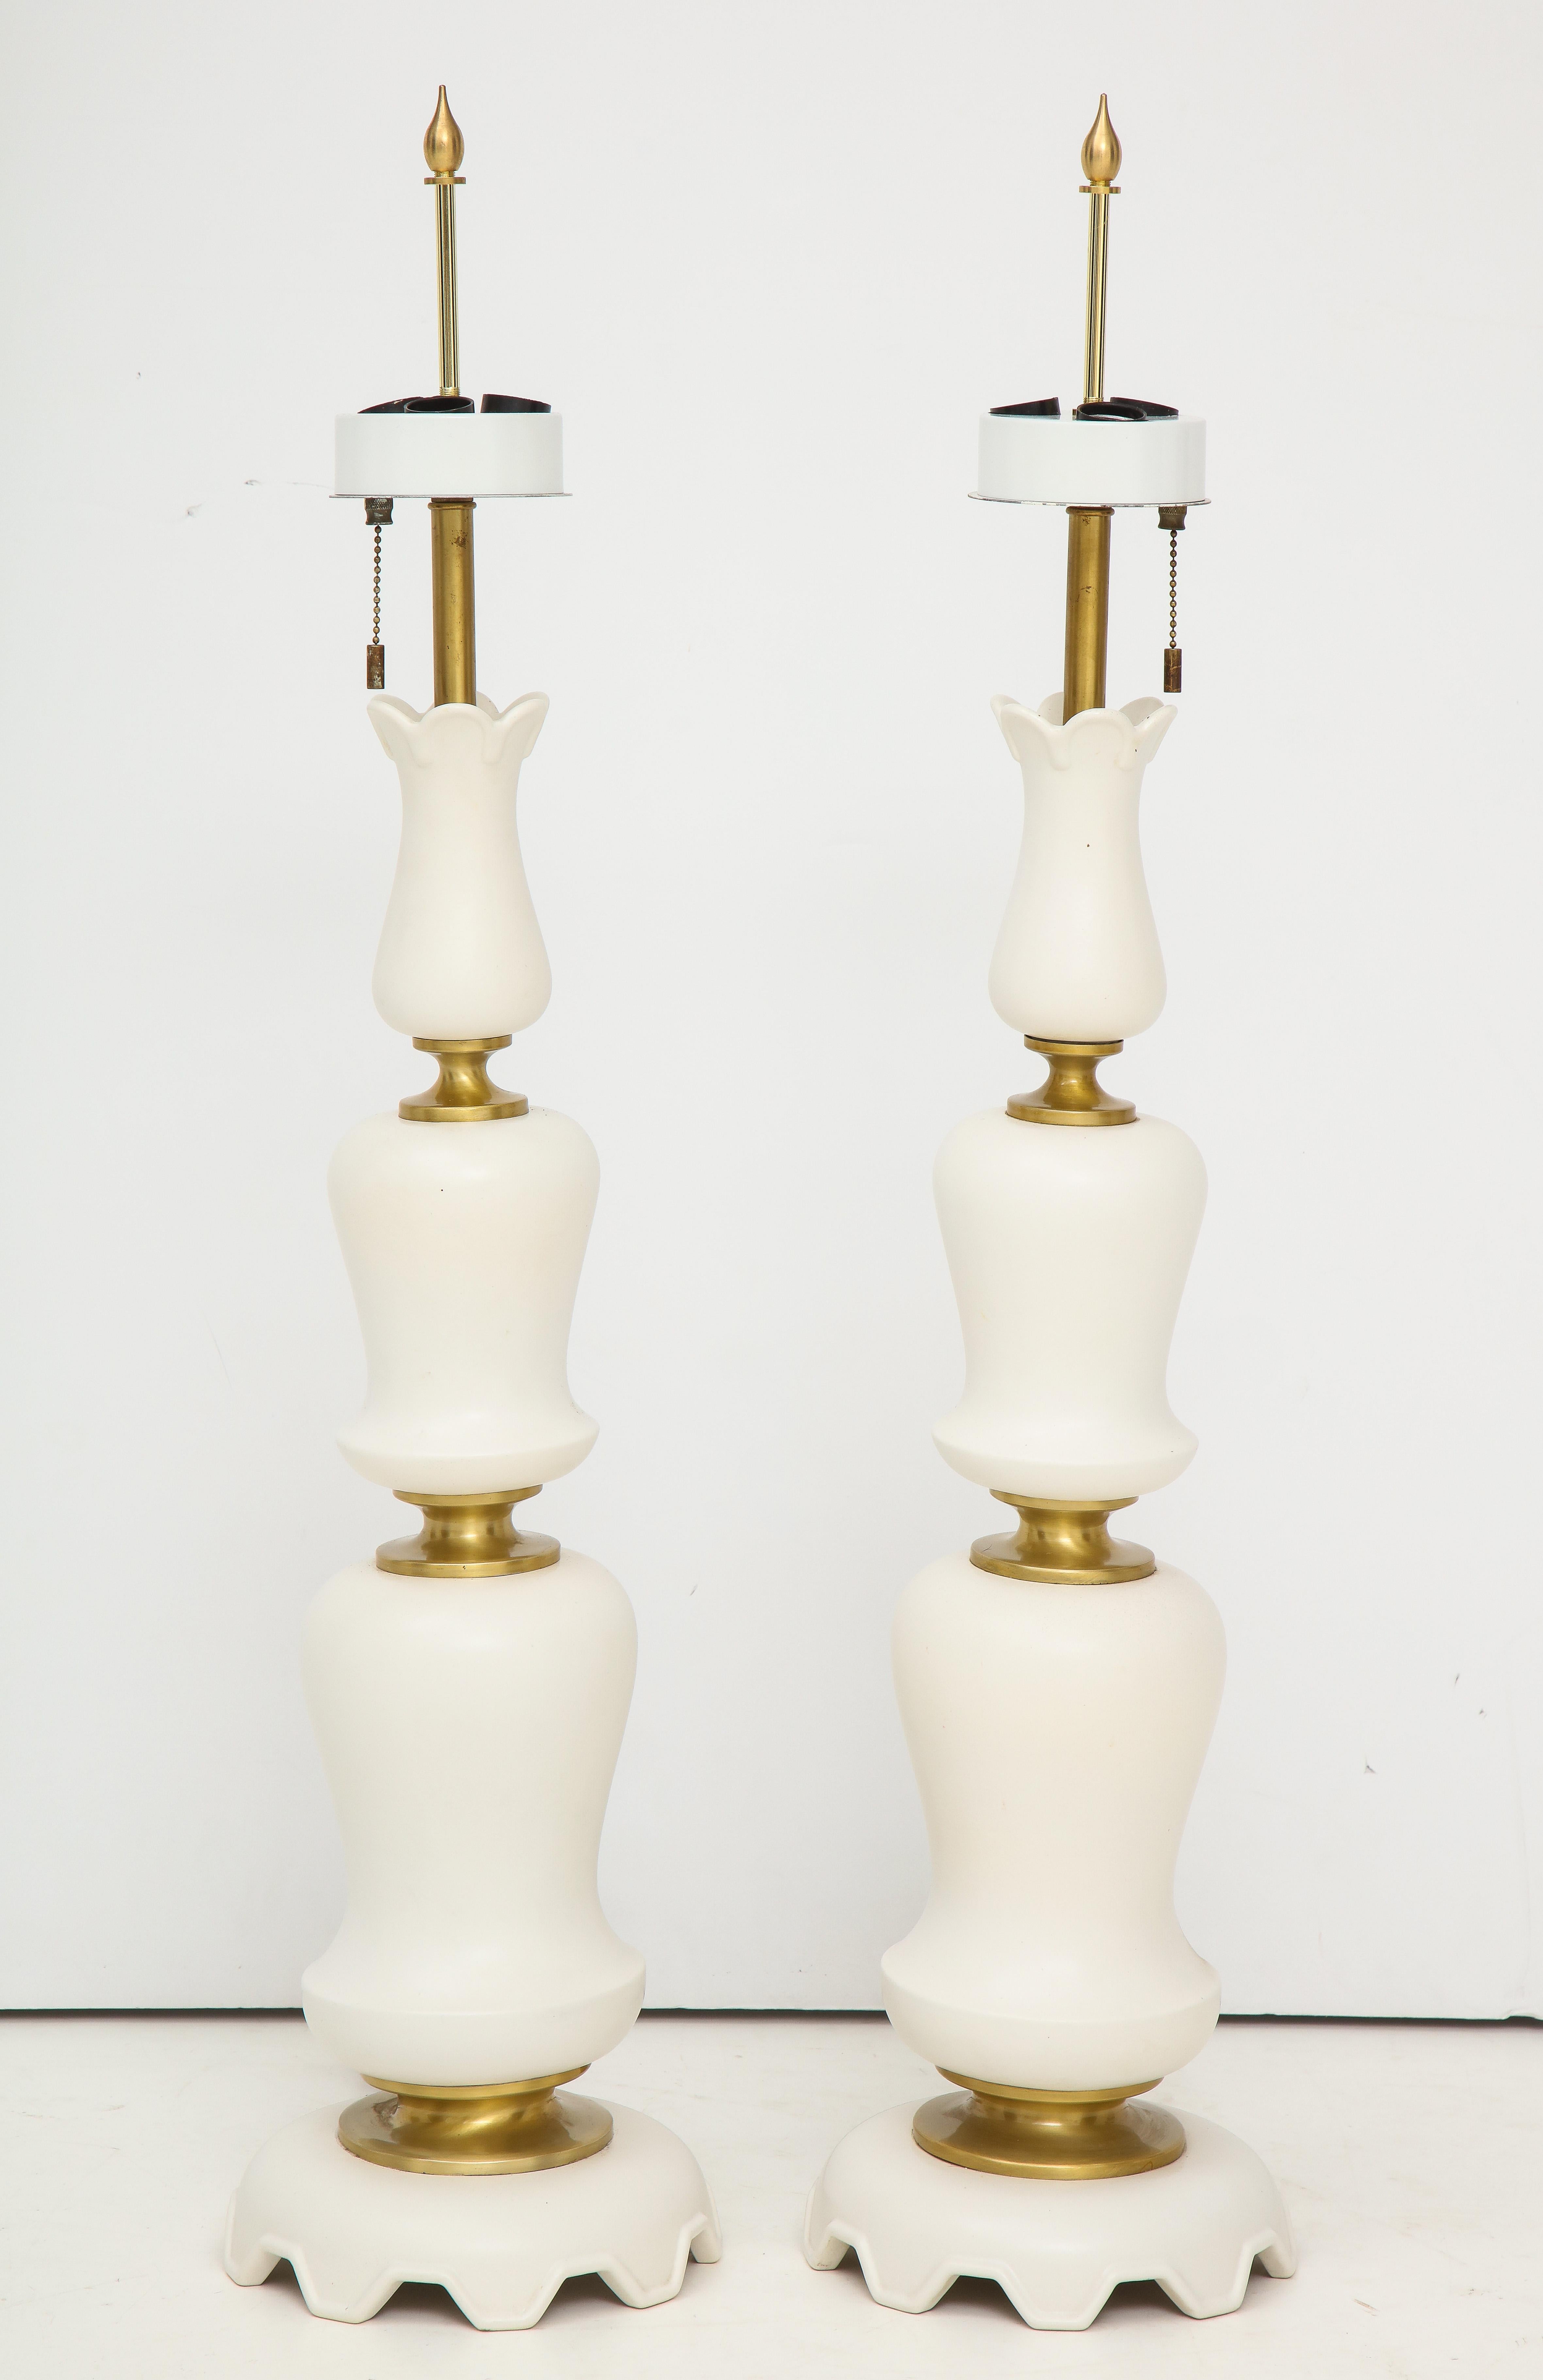 Pair of sculptural table lamps in a white Matte porcelain by Gerald Thurston for Lightolier.
The lamps each have three light sockets and they have been newly rewired.
One lamps has a slight hairline crack towards the bottom, as seen in the last